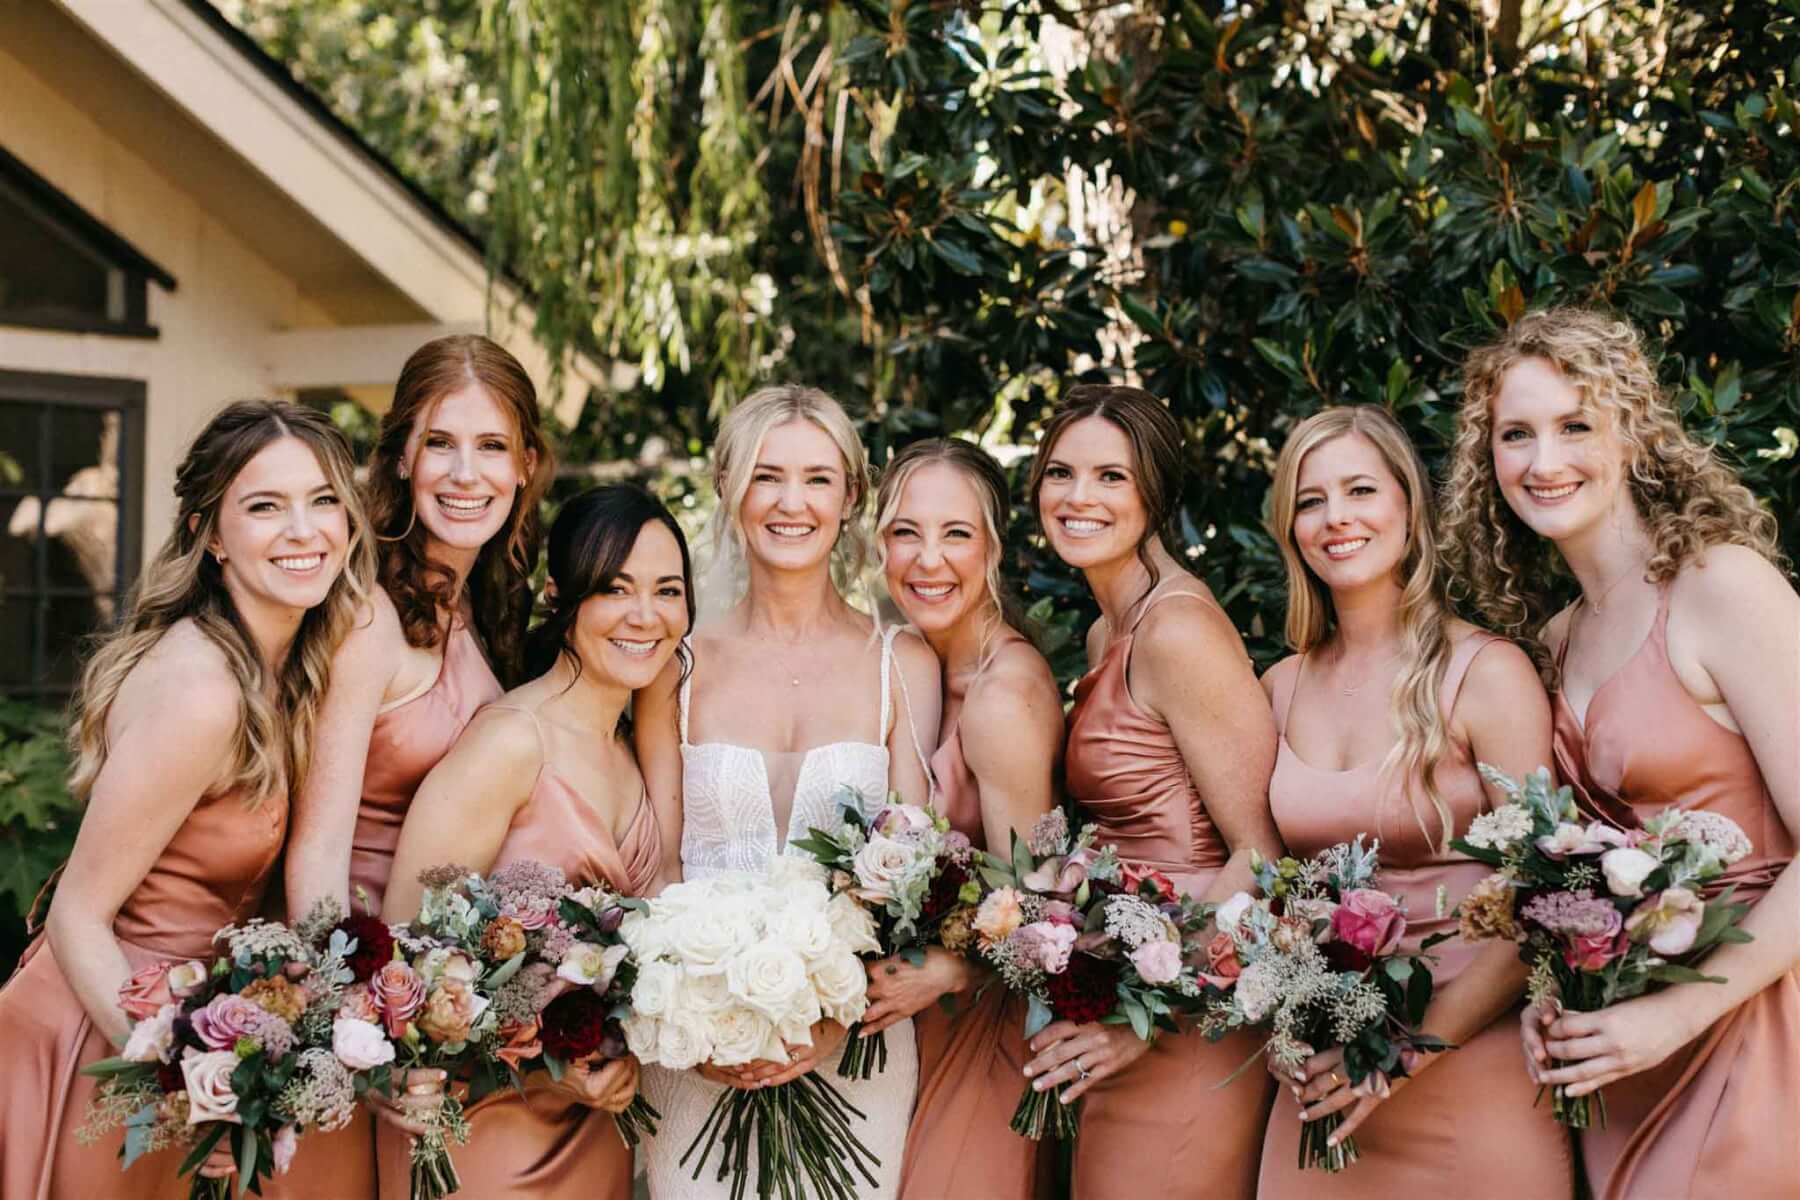 The bride holding an all-white bridal bouquet, and seven bridesmaids in rose-colored dresses holding bouquets in shades of deep plum, coral, peach, sage, and forest green.